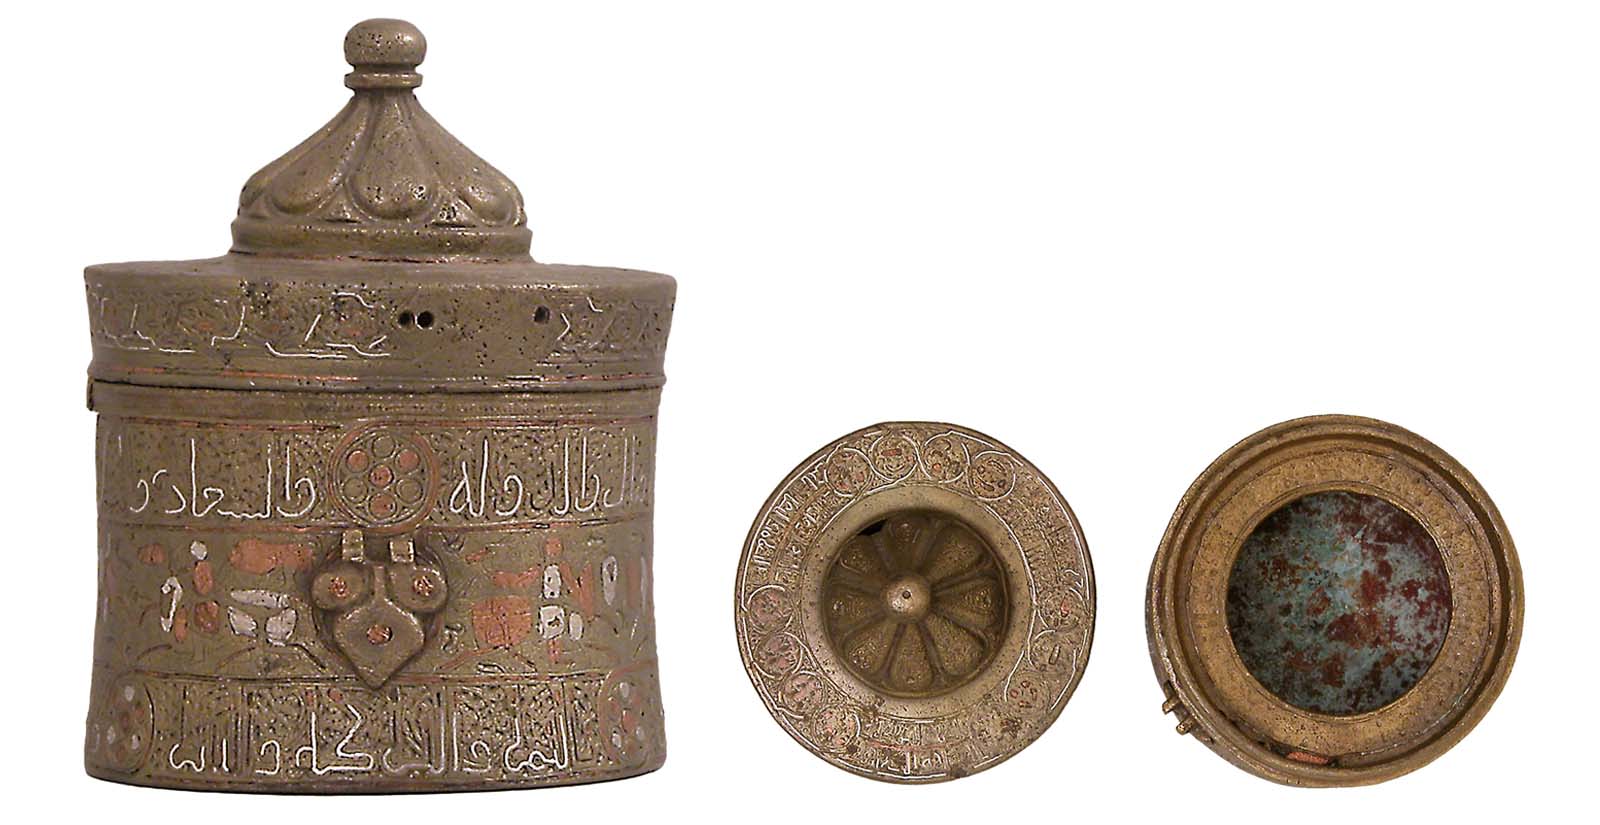 The open grooves of this 12th-century bronze-cast vessel once held inlaid silver and copper. It was most likely an inkwell, and the Arabic inscriptions on the upper and lower bands offer praises and good wishes to its owner.